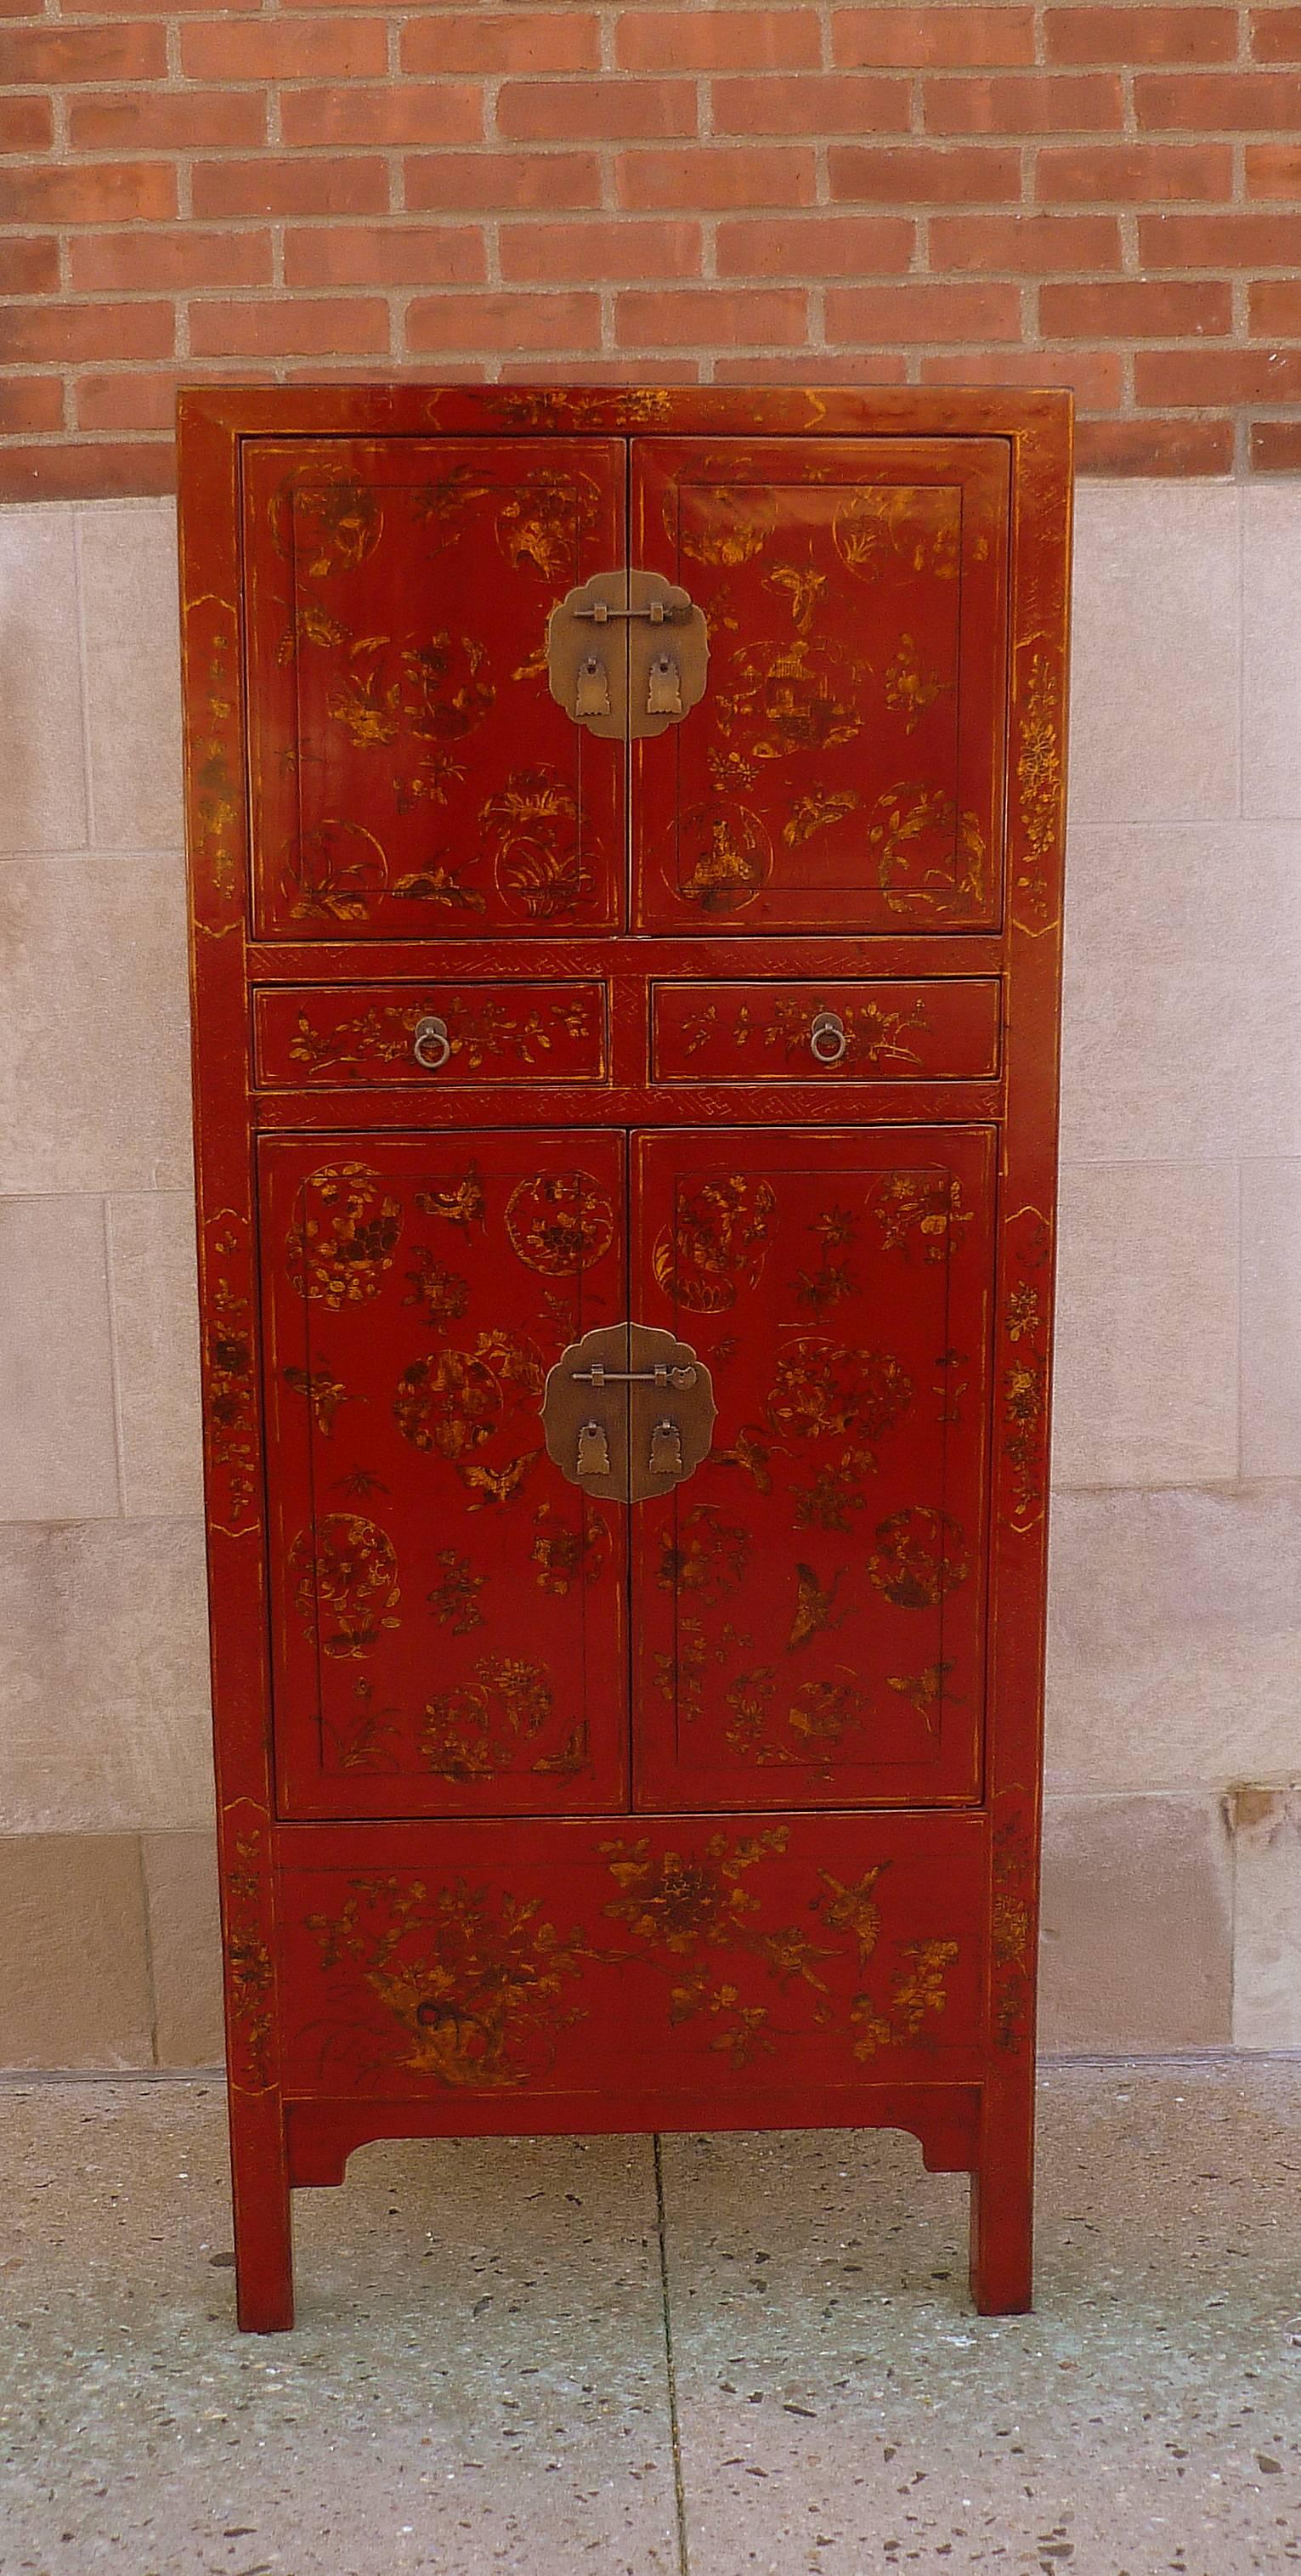 An elegant red lacquer armoire, red lacquer front with fine hand-painted muted gold gilt motif, black lacquered sides, brass fitting. Beautiful colors, form and detail.  We carry fine quality furniture with elegant finished and has been appeared